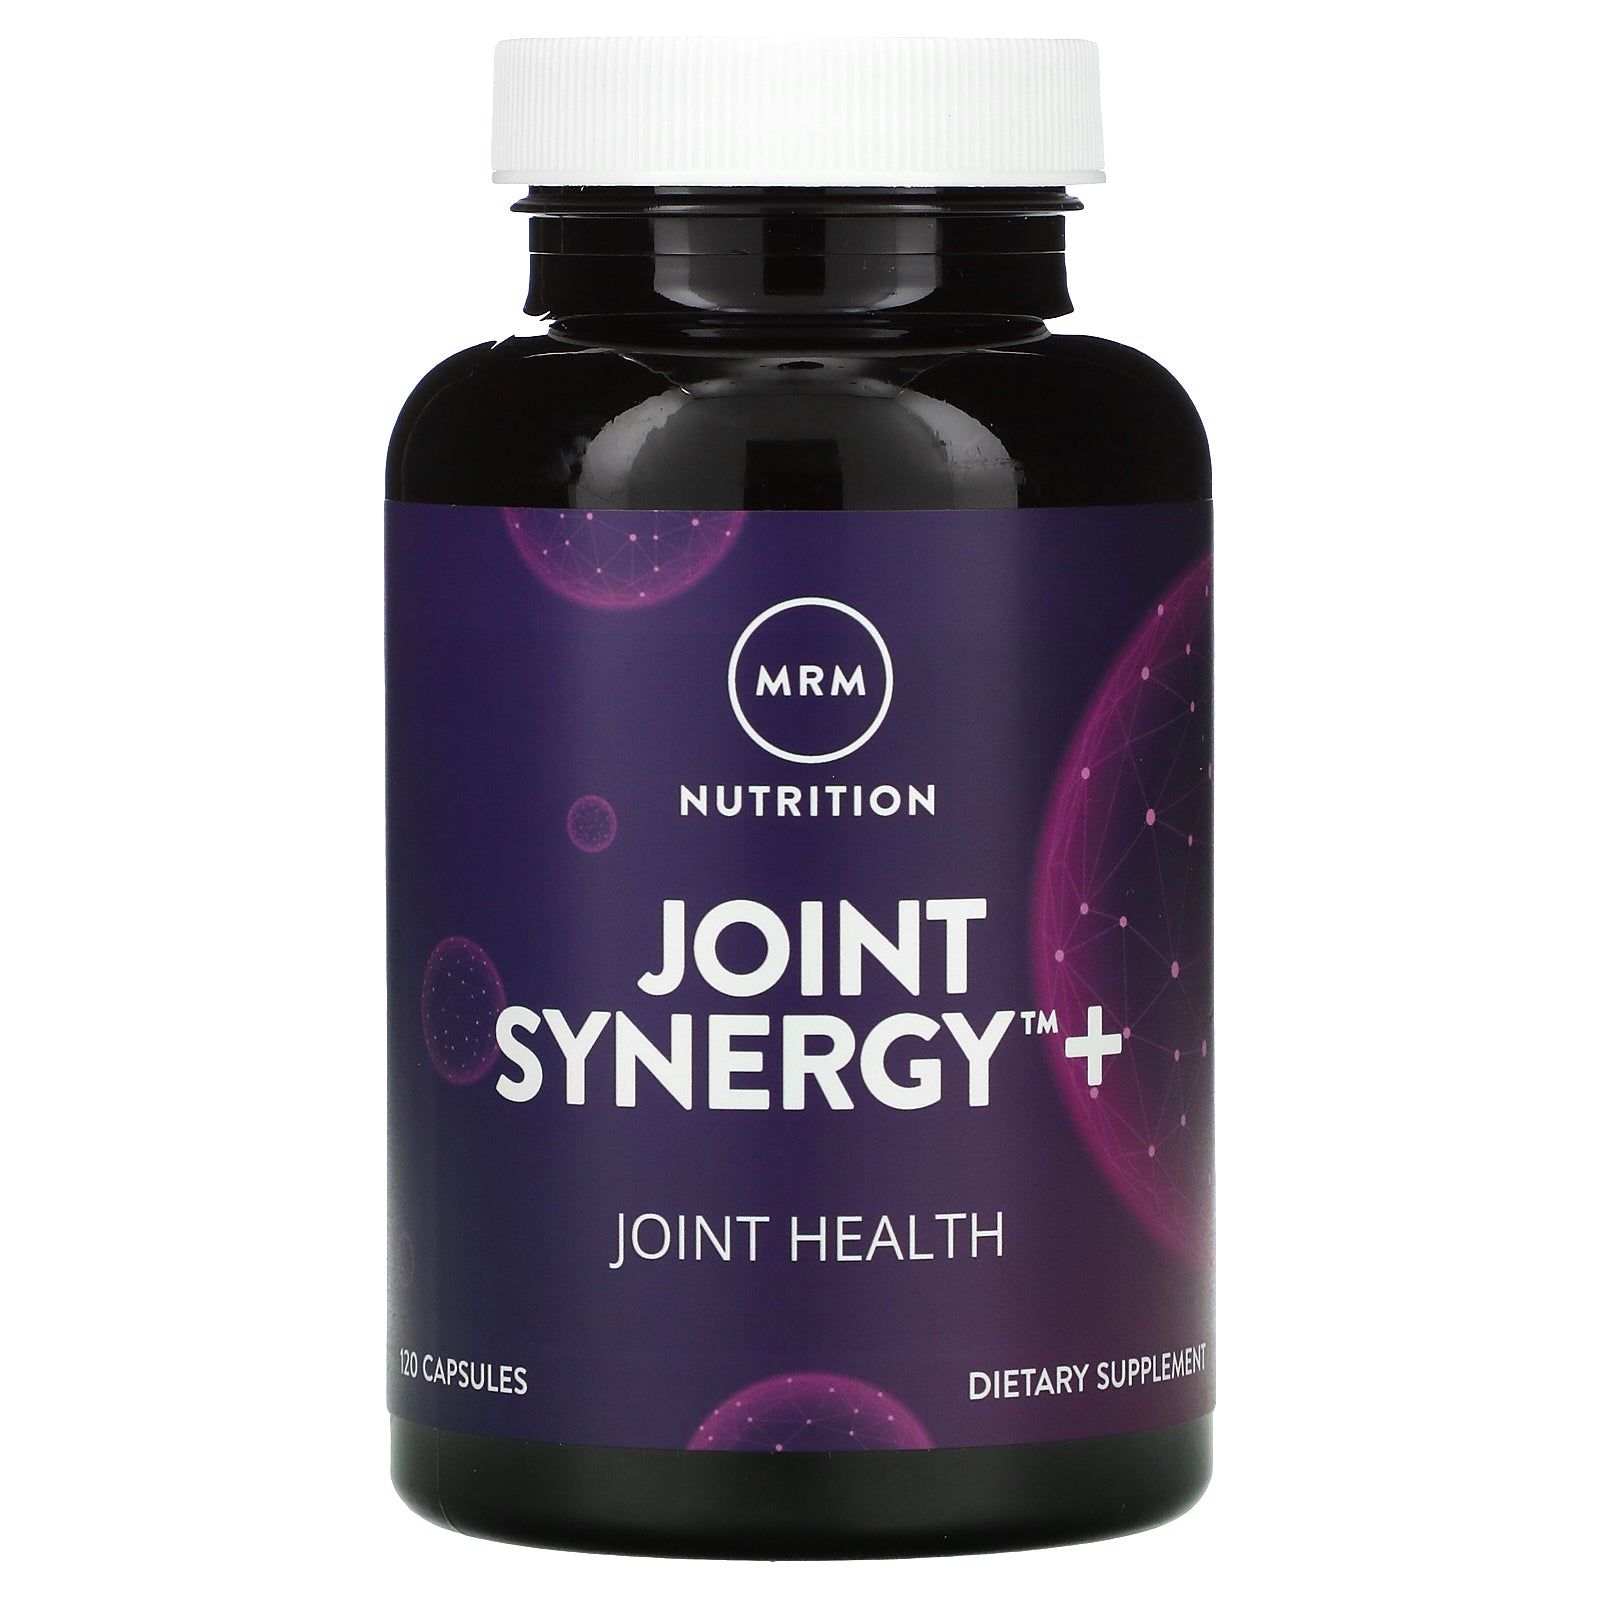 MRM, Joint Synergy +